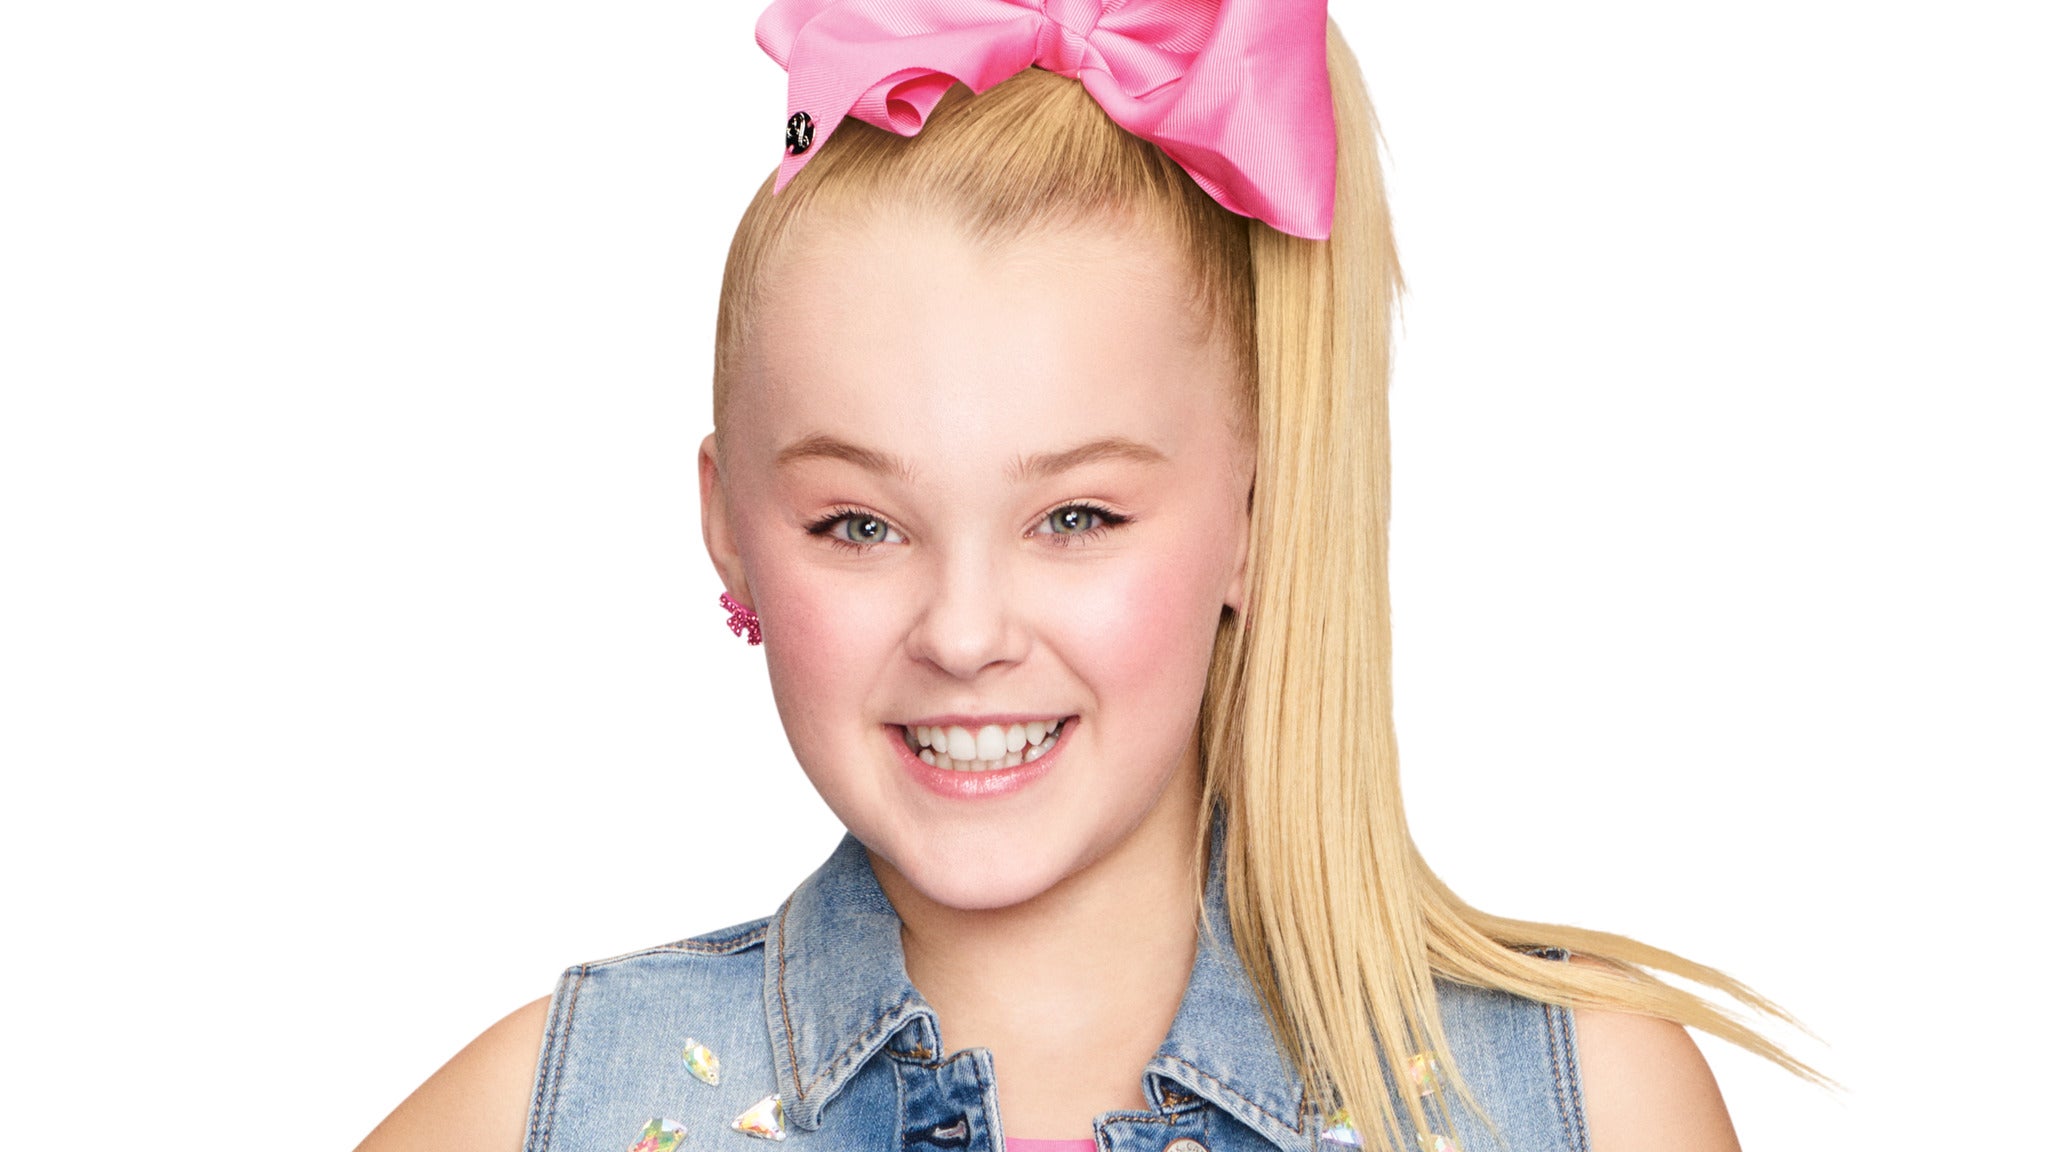 Nickelodeon's JoJo Siwa D.R.E.A.M. The Tour in Pittsburgh promo photo for Siwanatorz presale offer code